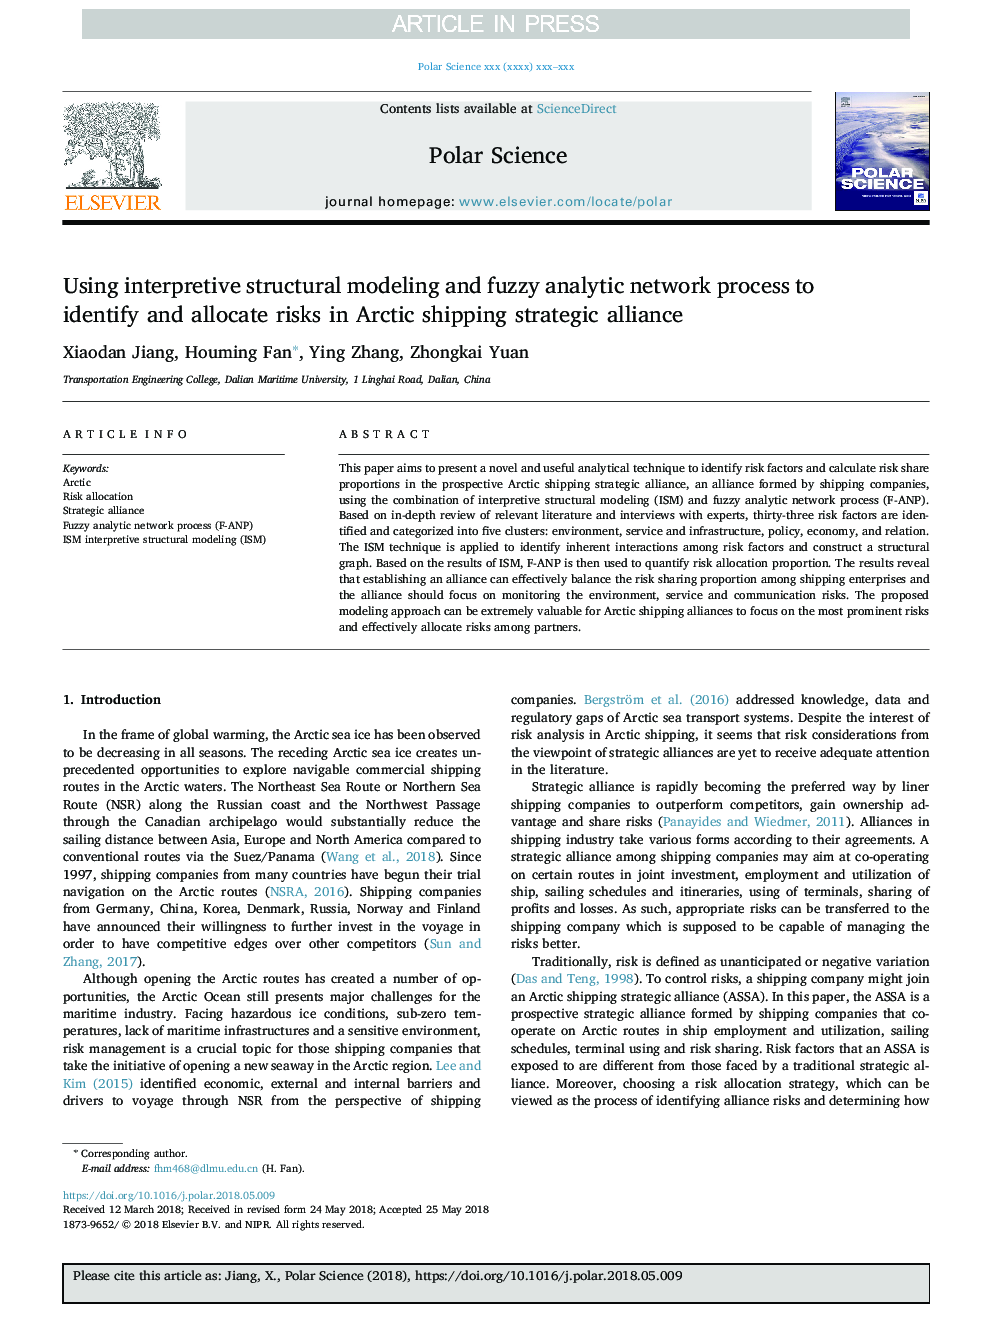 Using interpretive structural modeling and fuzzy analytic network process to identify and allocate risks in Arctic shipping strategic alliance